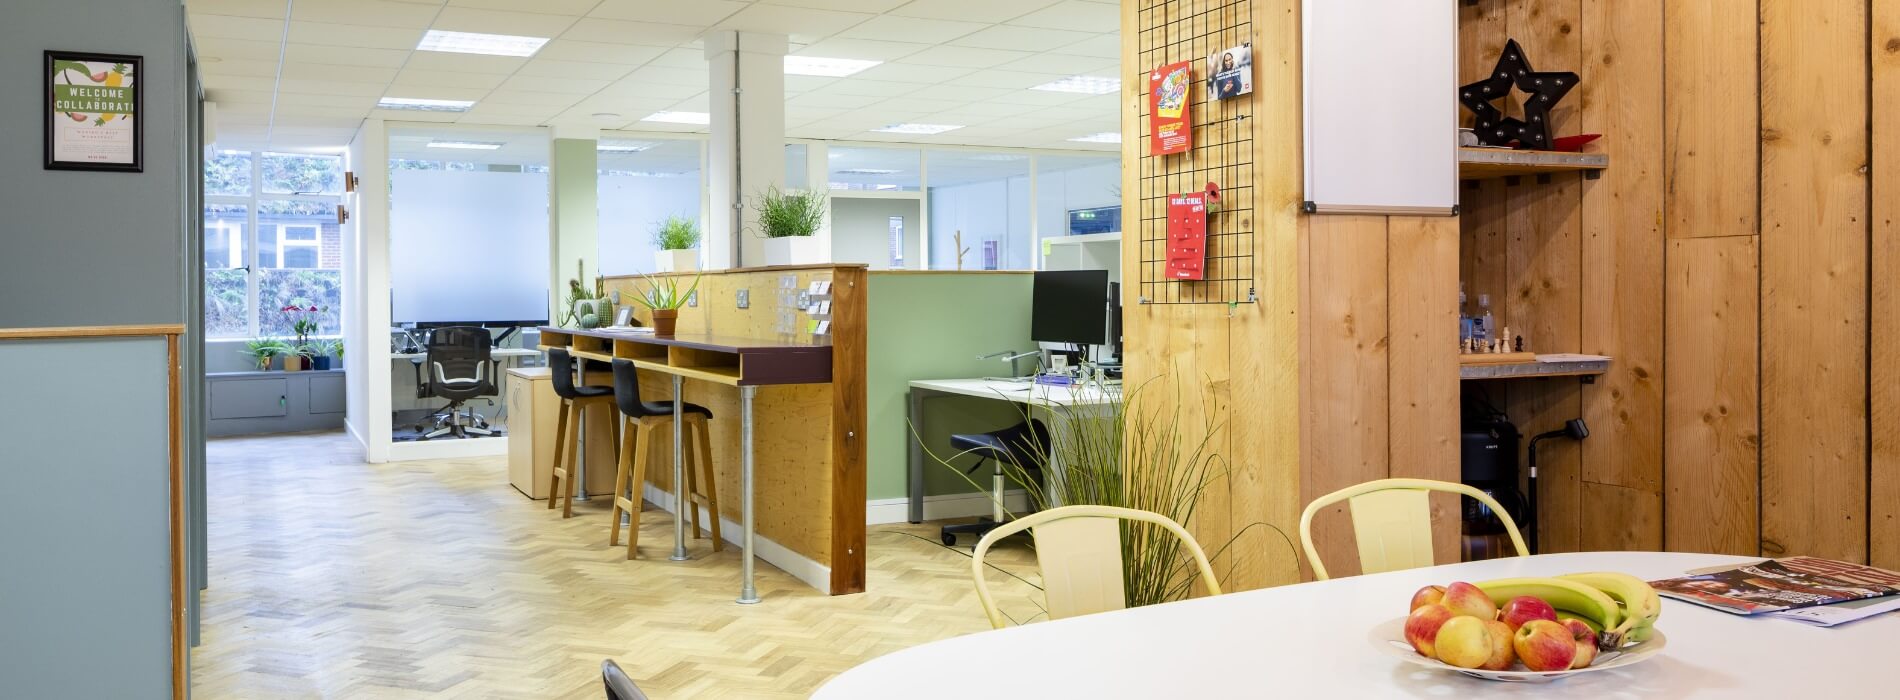 Kitchen area for coworking breakout space in woking